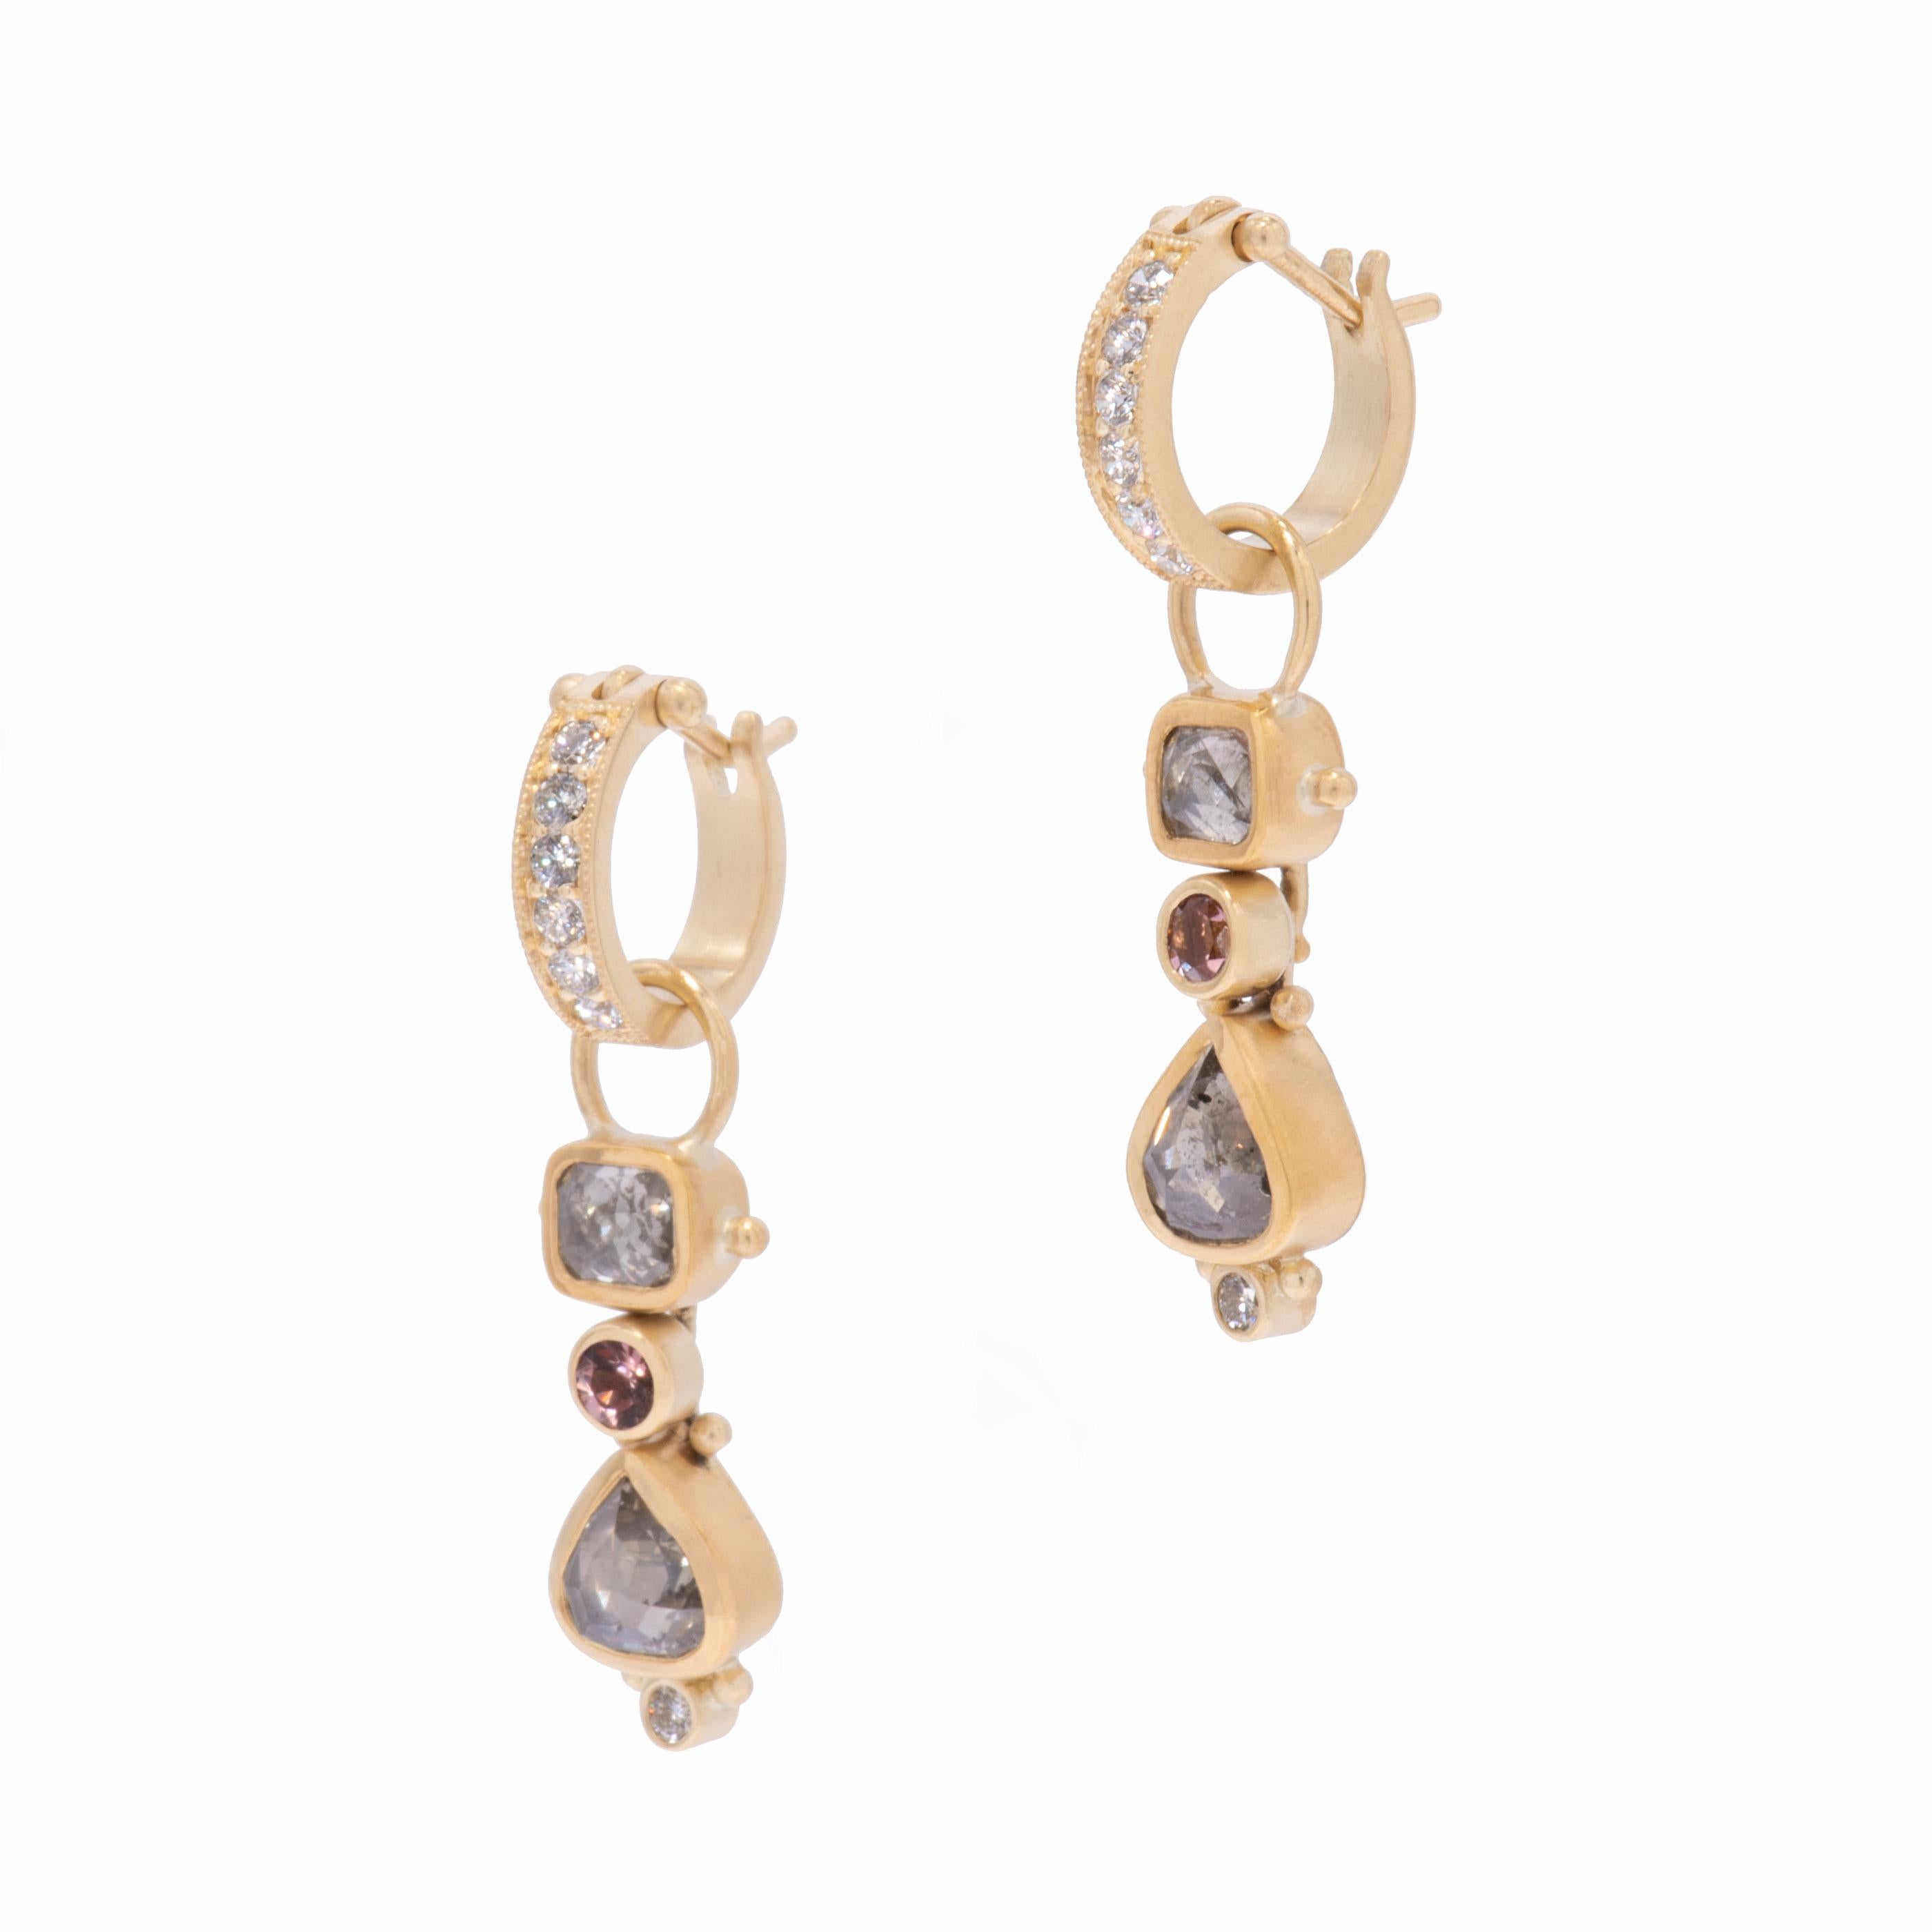 Rosie's Grey Diamond Drop Earrings hold 3.44cts of softly glowing grey diamonds bezel set in 22 karat and 18 karat gold. Gold beads frame the diamond centers and sparkling, dusty, pink tourmalines .22 tcw are the perfect enhancement to draw